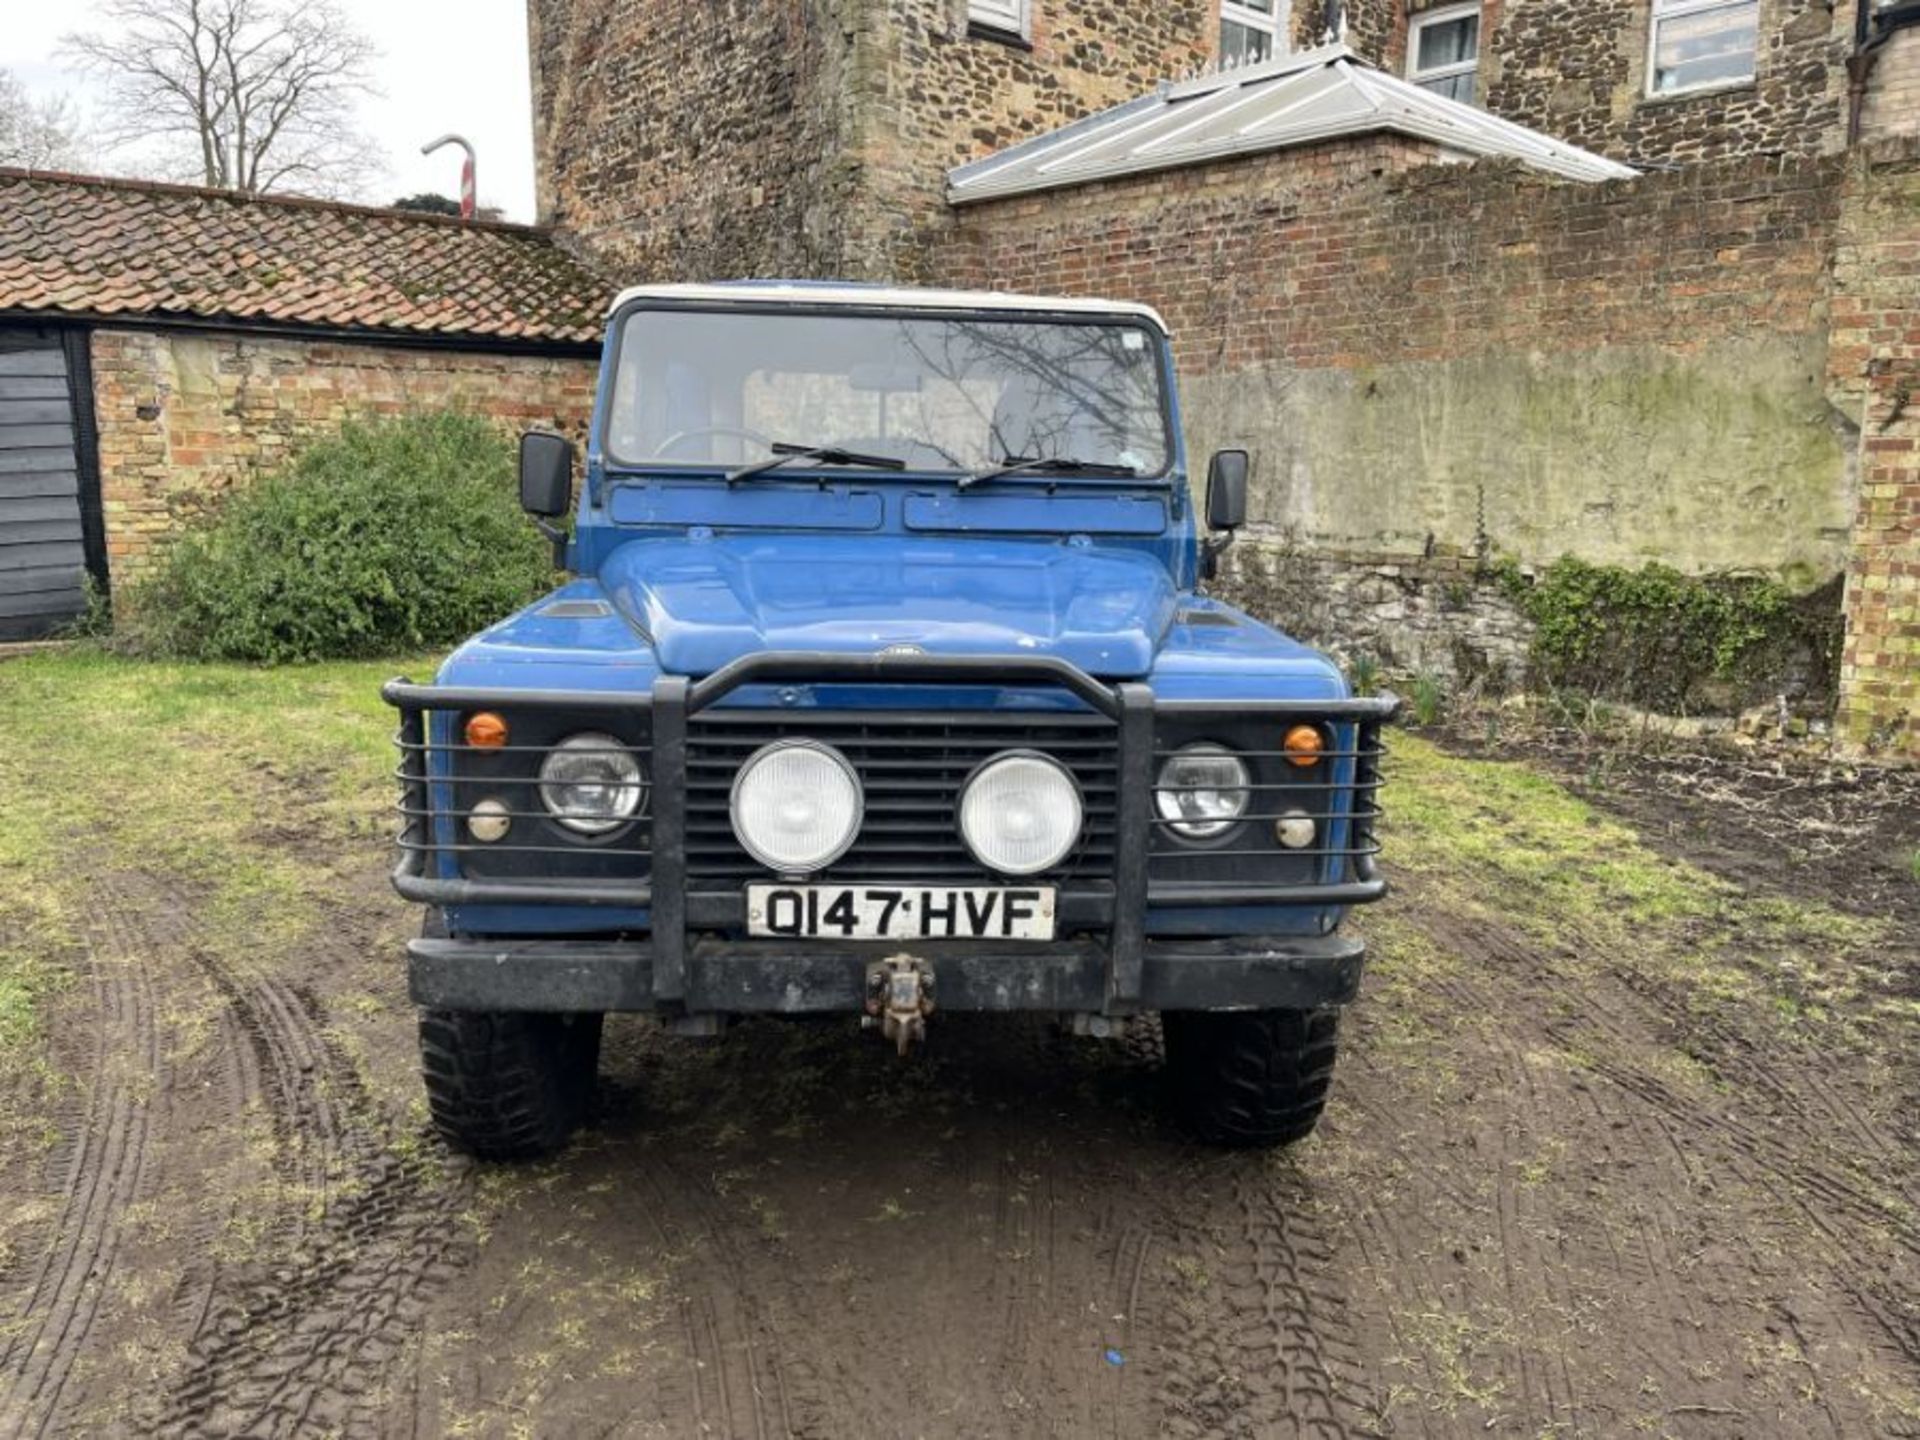 1992 Land Rover Defender, SWB pickup, blue complete with spare wheels and a heavy duty winch in - Image 7 of 11